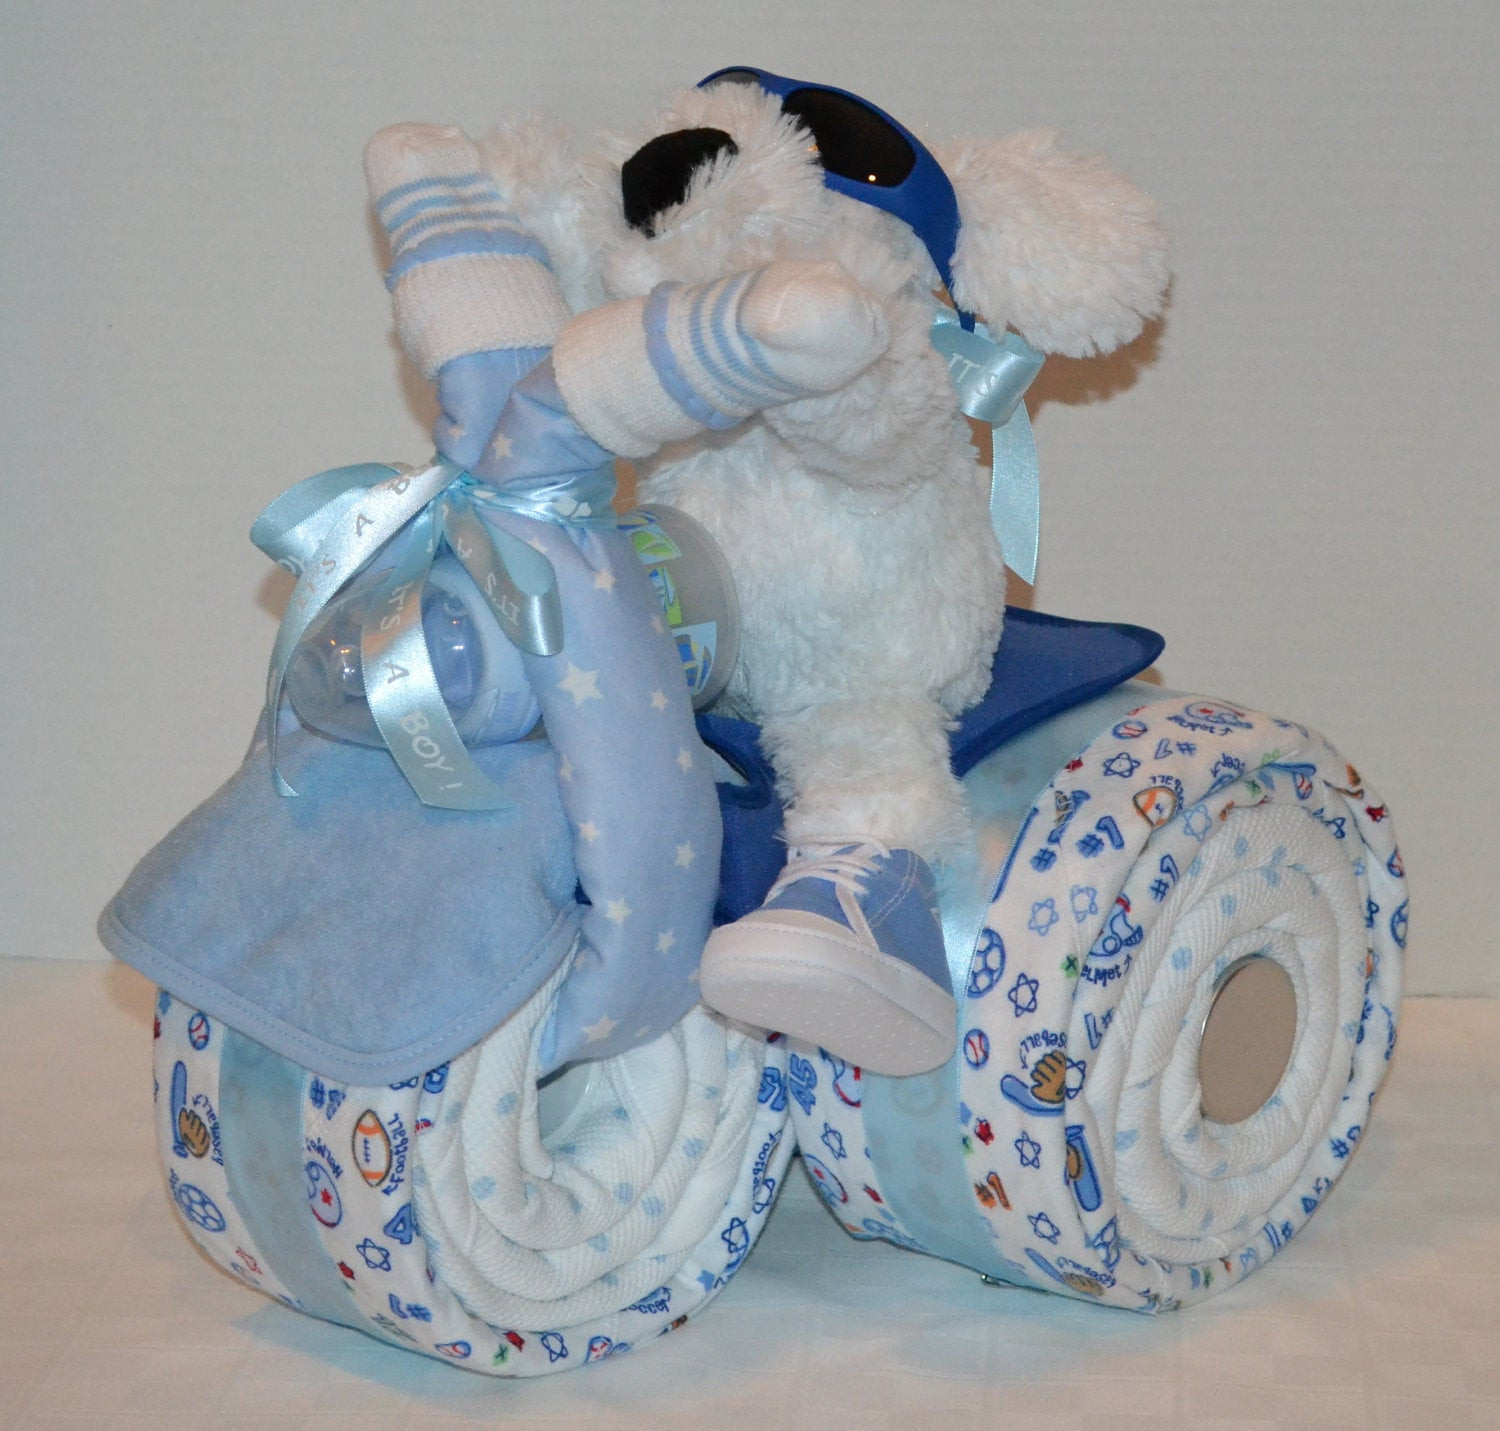 Gift Ideas For A Newborn Baby Boy
 Tricycle Trike Diaper Cake Baby Shower Gift Sports theme